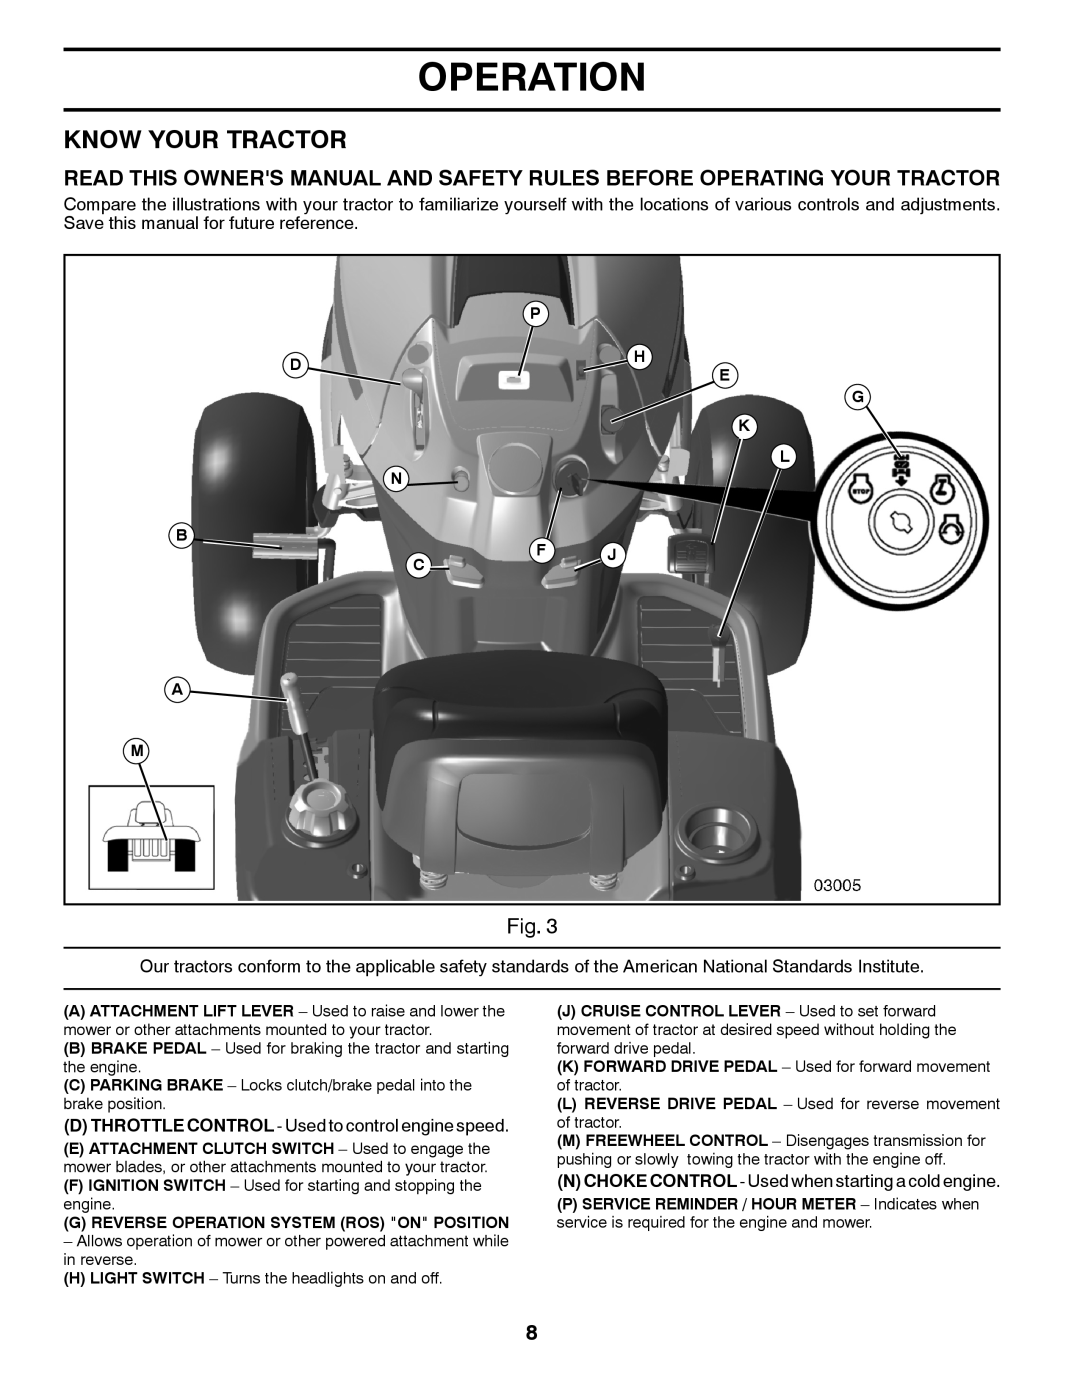 Husqvarna 96045002202, 532 43 65-03 owner manual Know Your Tractor, Operation, P Dh E G K L N, B A M, Cf J 